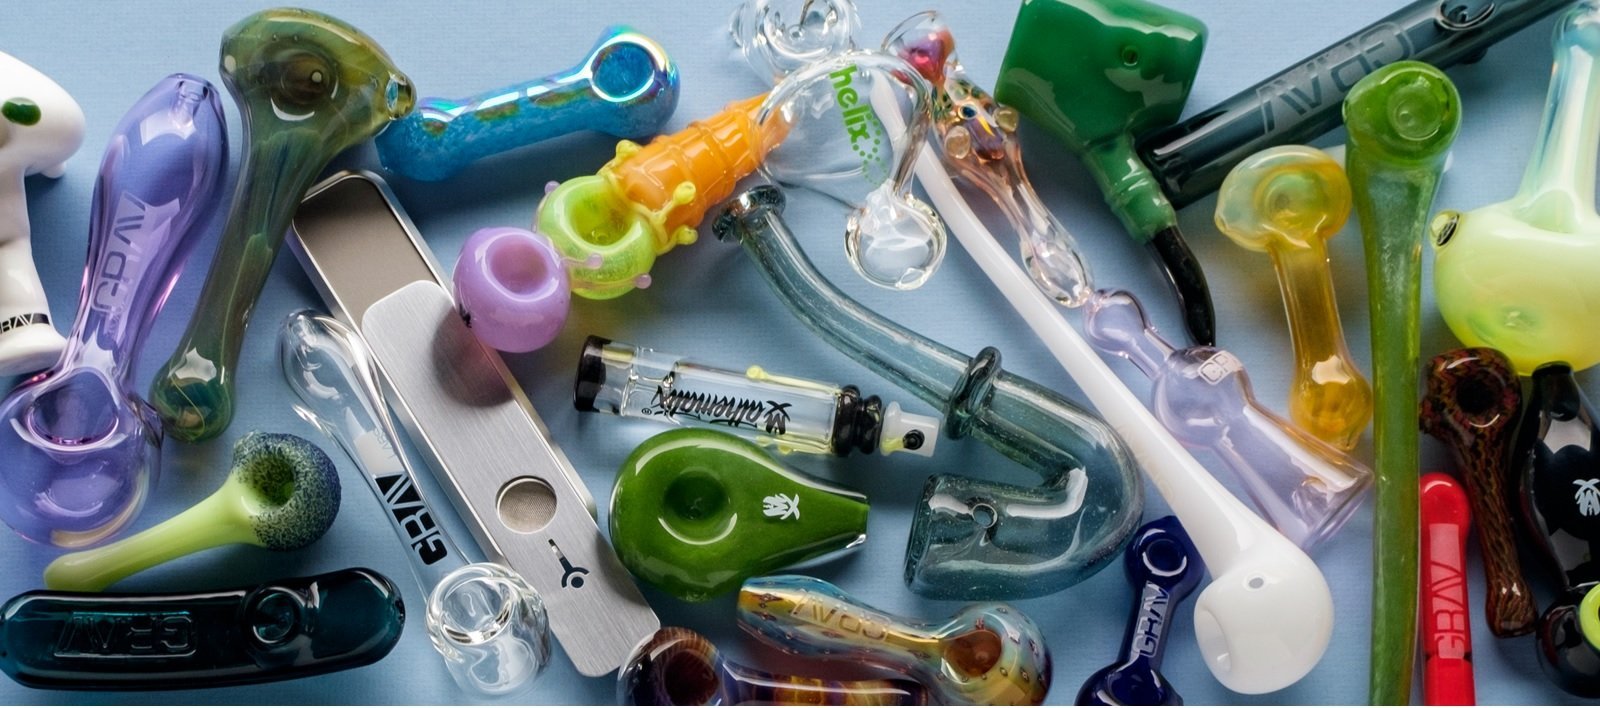 Why Curating Your Pipe Collection is Important - 420 Science